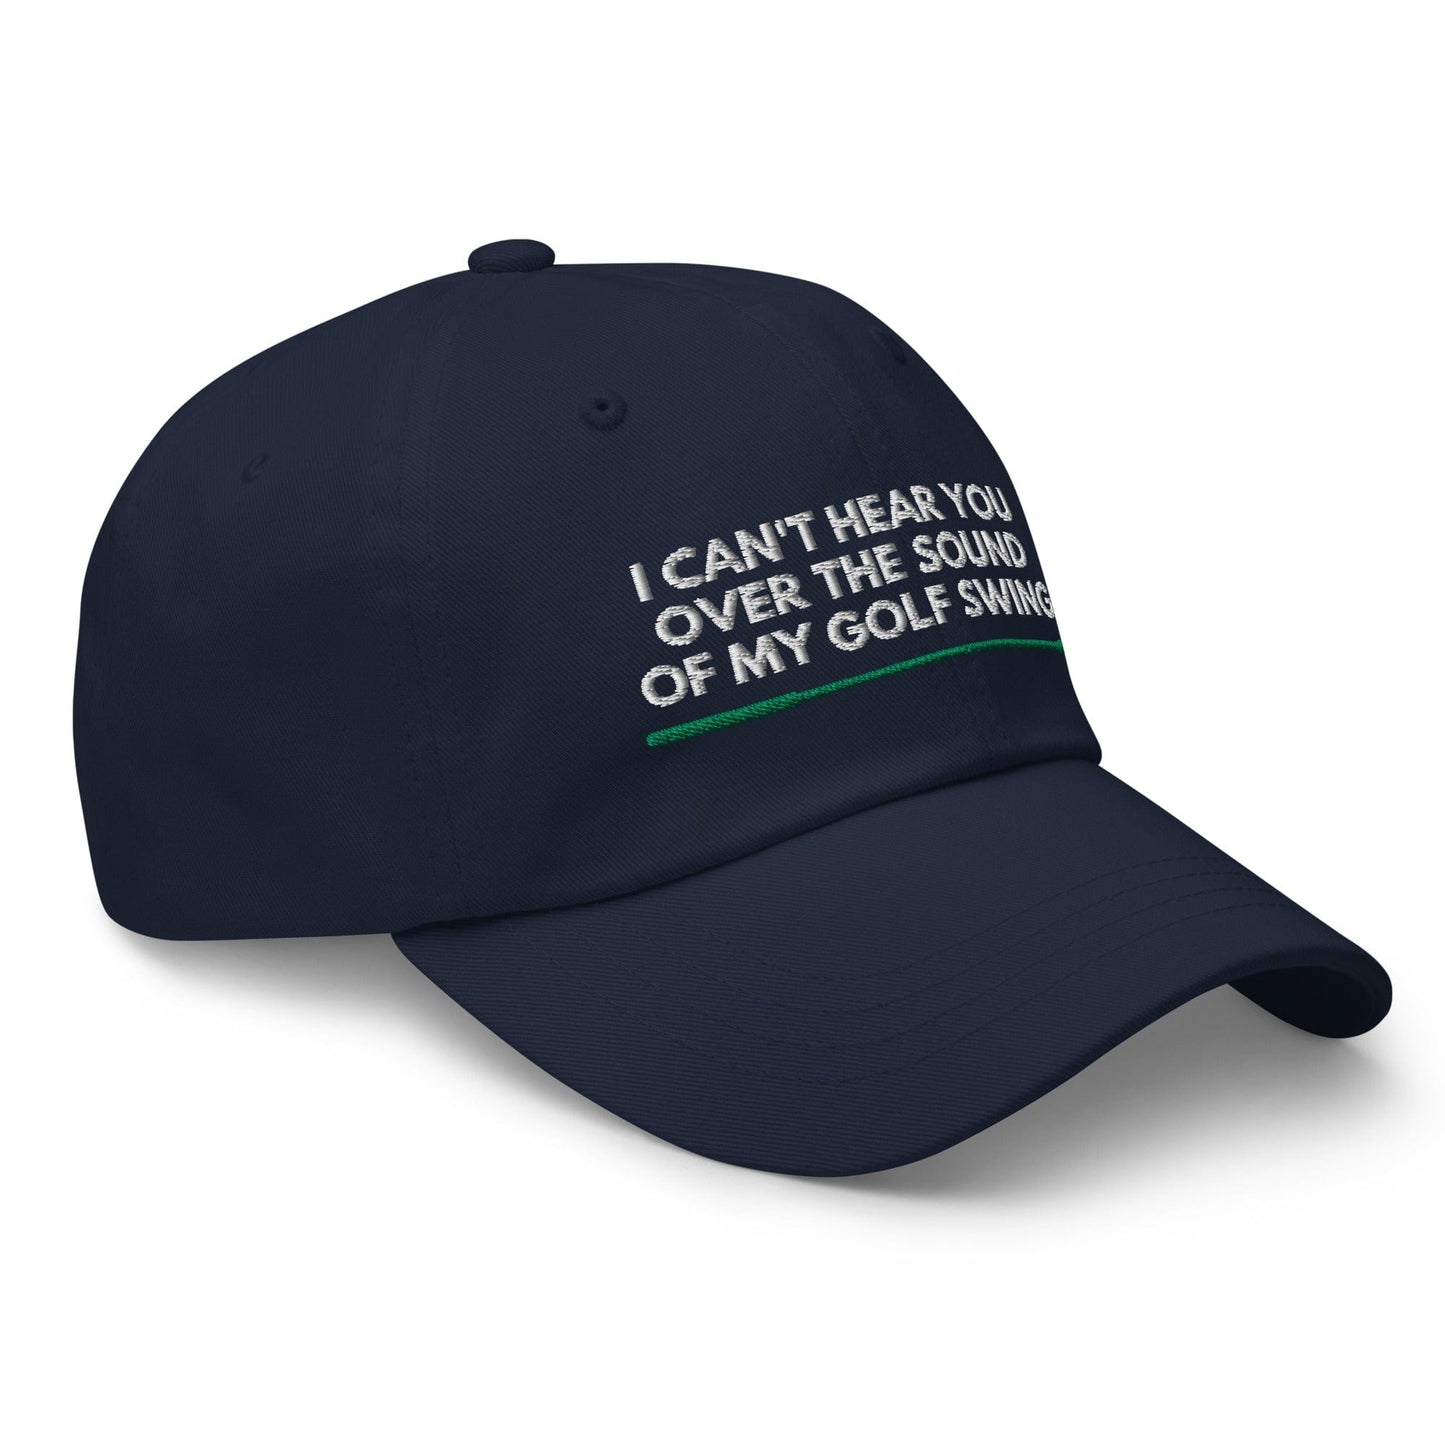 Funny Golfer Gifts  Dad Cap Navy I Cant Hear You Over The Sound Of My Golf Swing Hat Cap